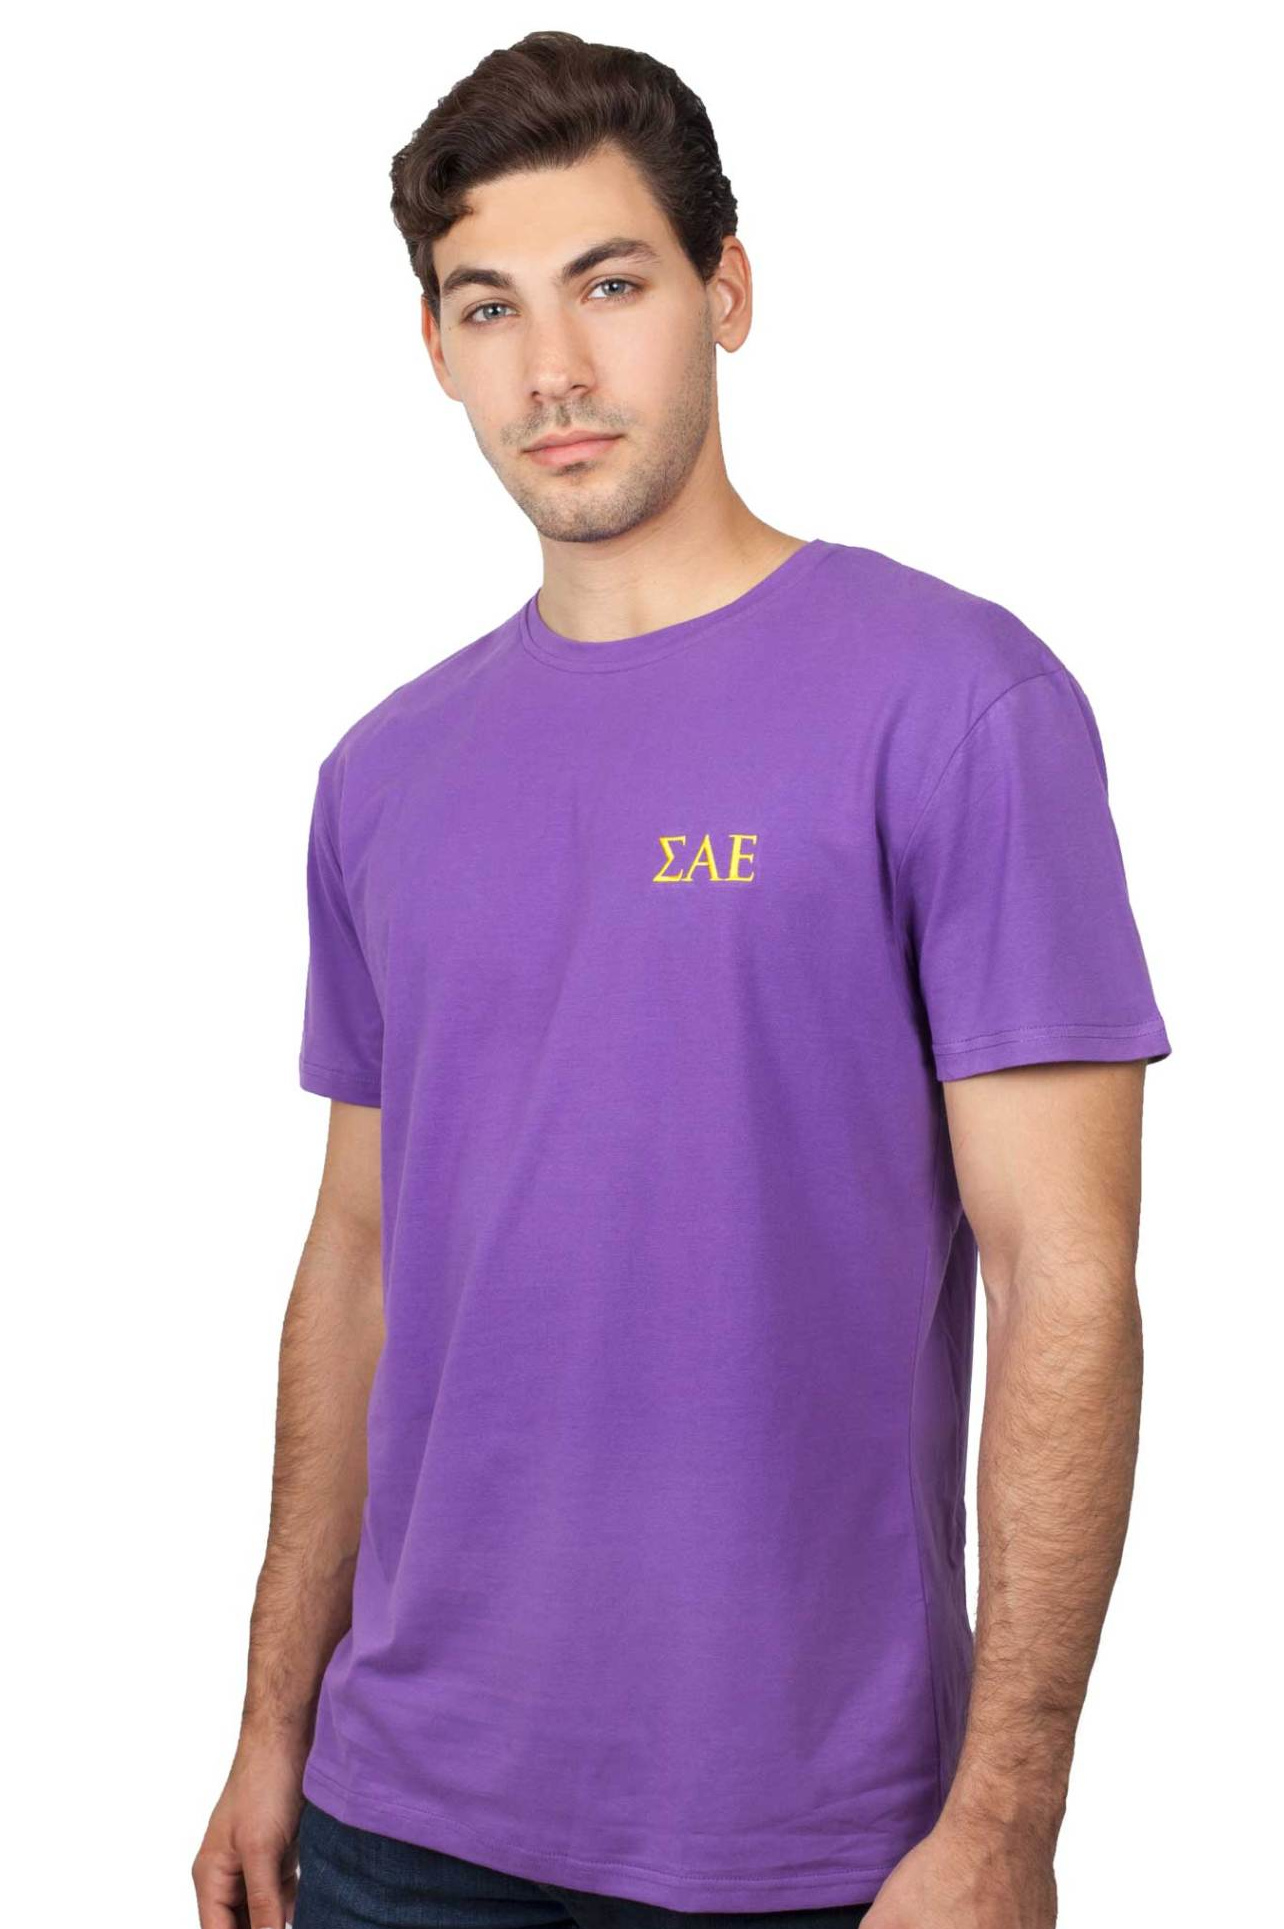 From SAEClothes.com... Royal Purple T-Shirt with Old Gold SAE Greek Lettering